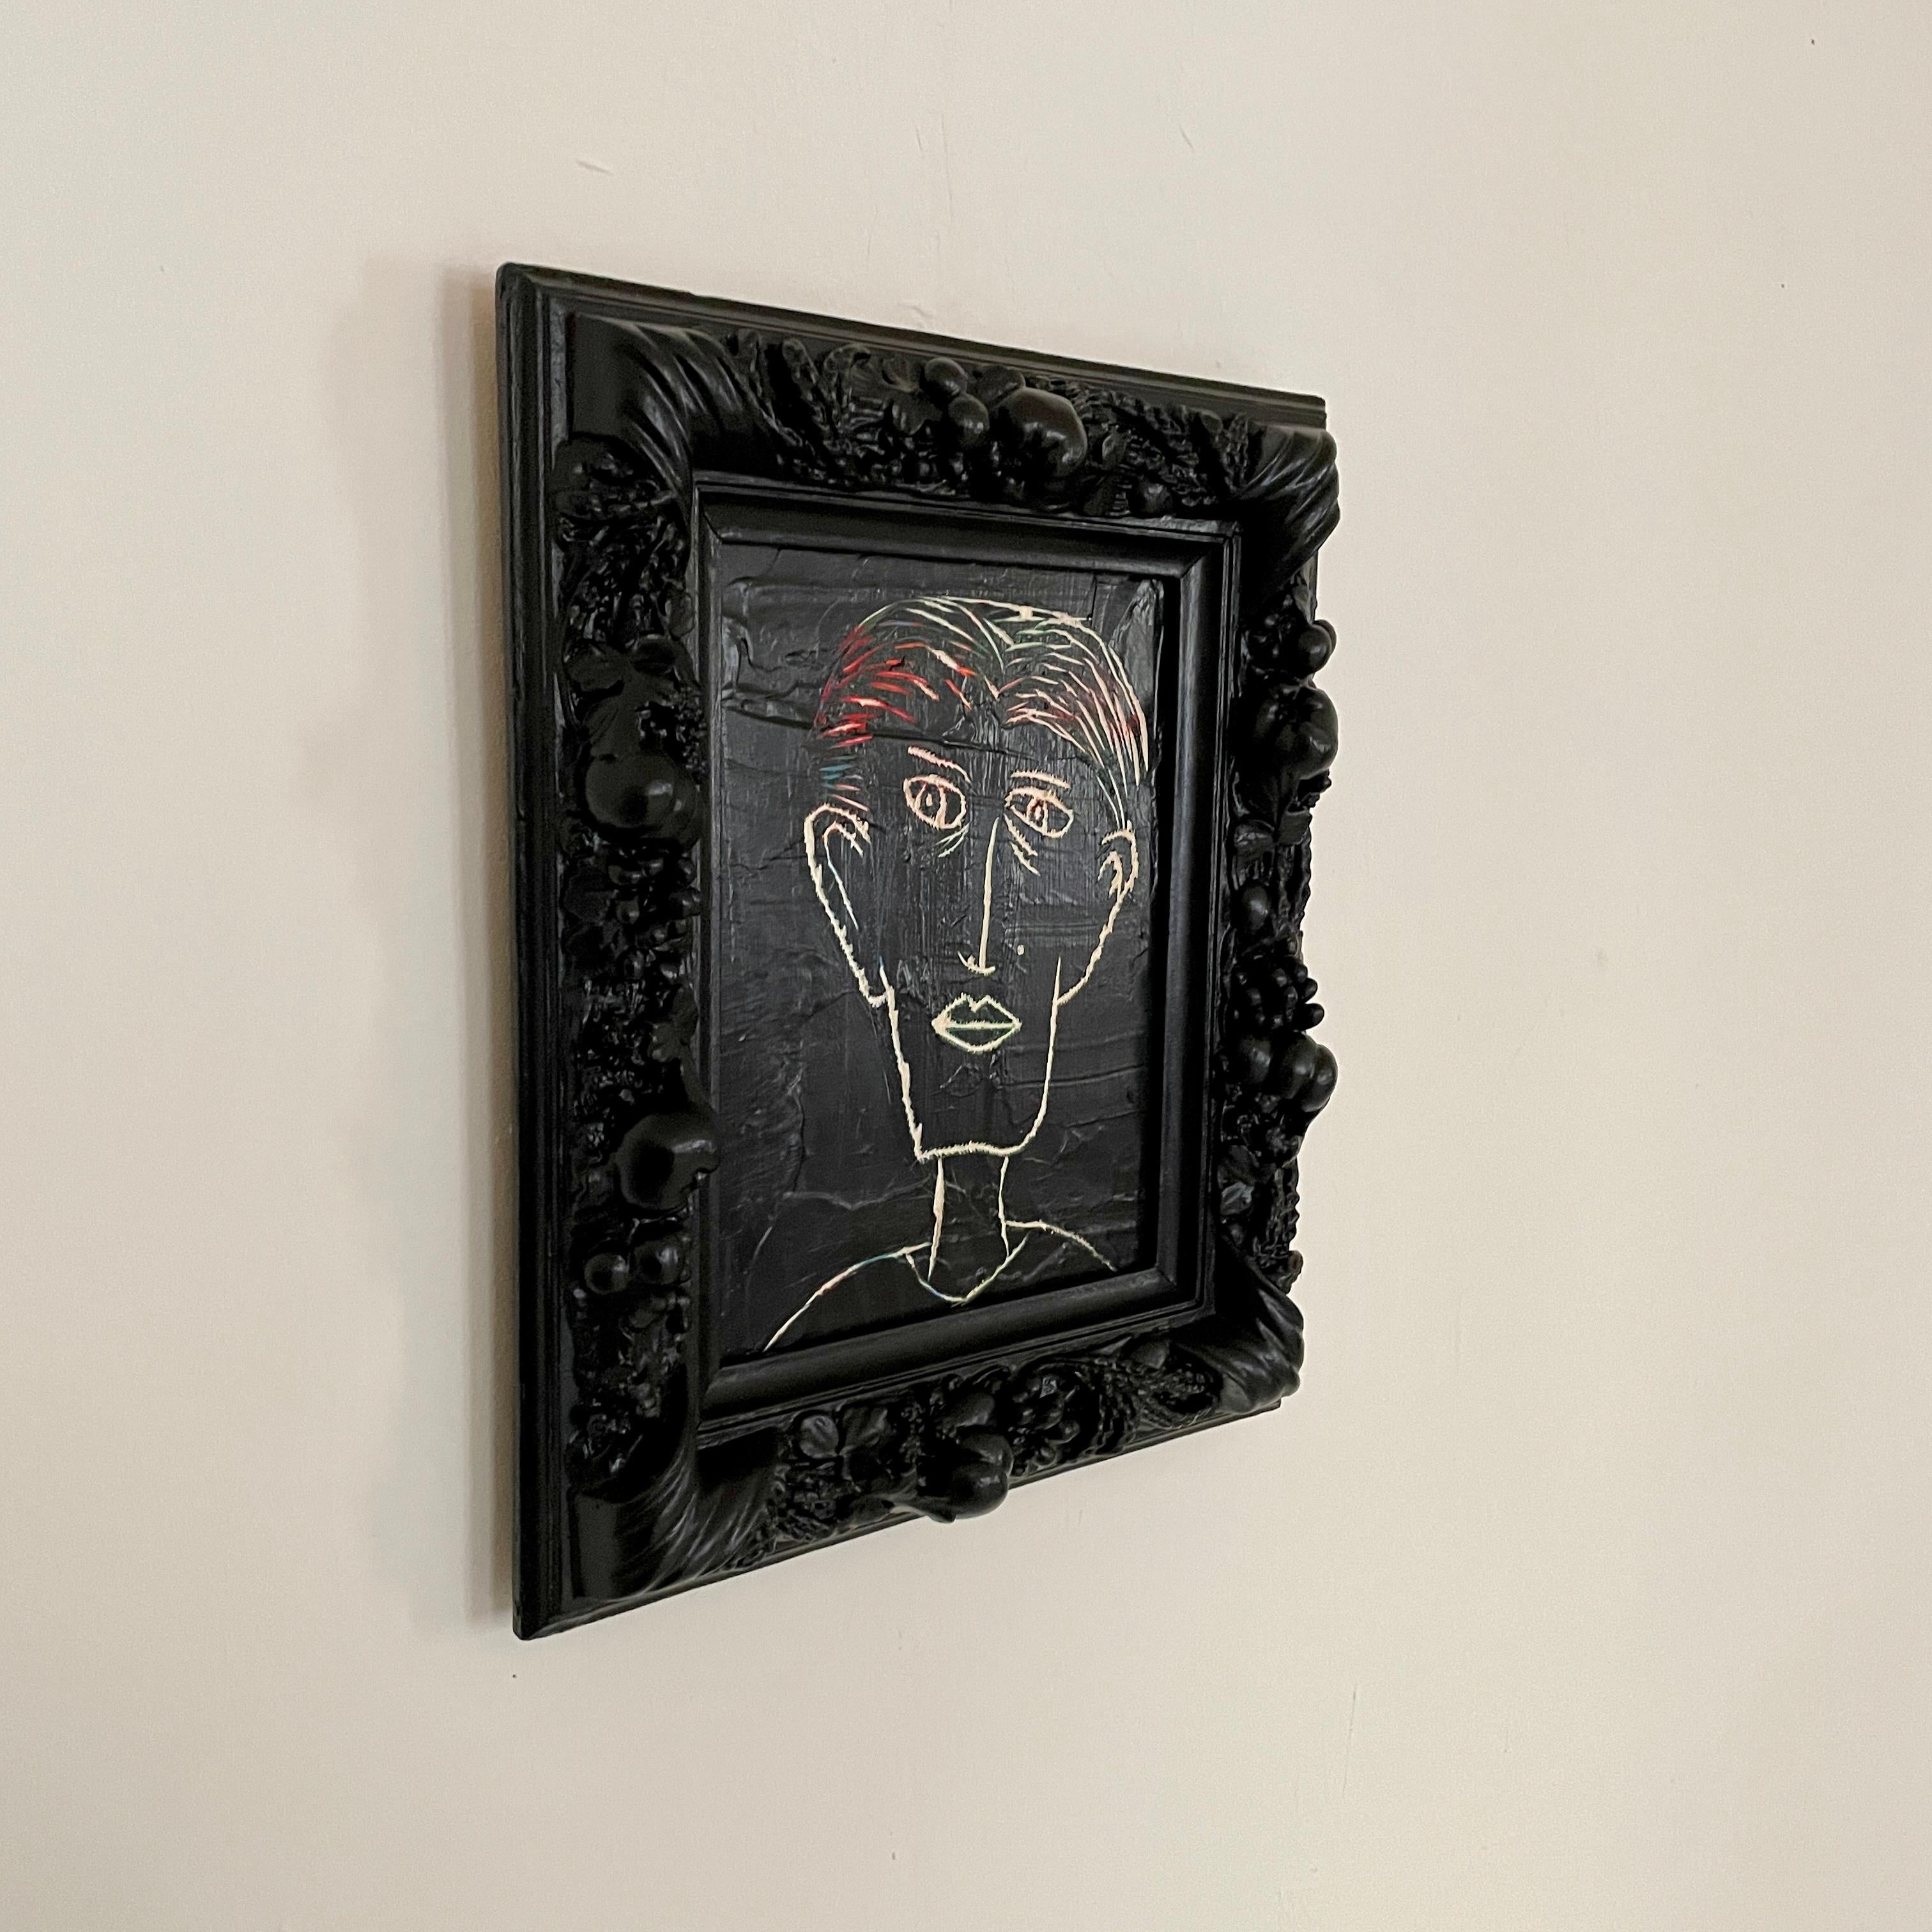 Hand-Painted Contemporary Modern Acrylic Black Painting on Wood Framed in an Old Frame